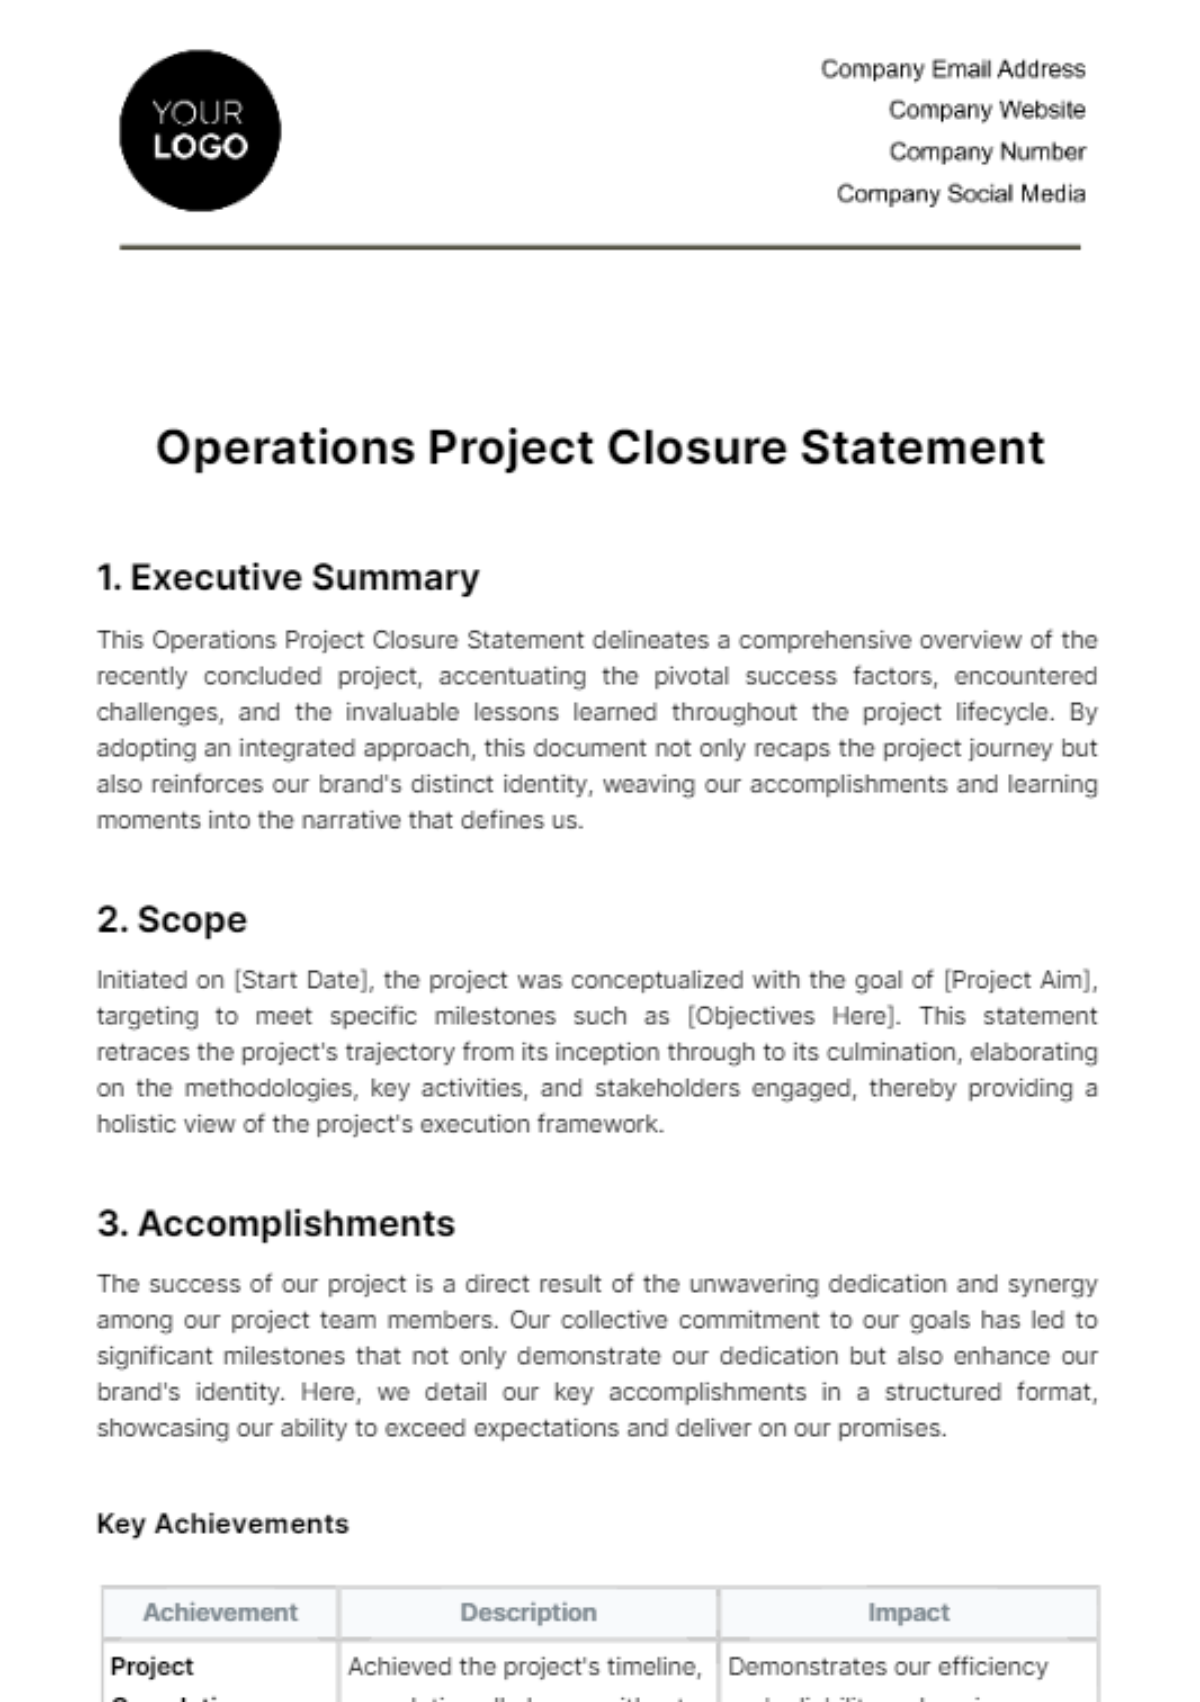 Free Operations Project Closure Statement Template